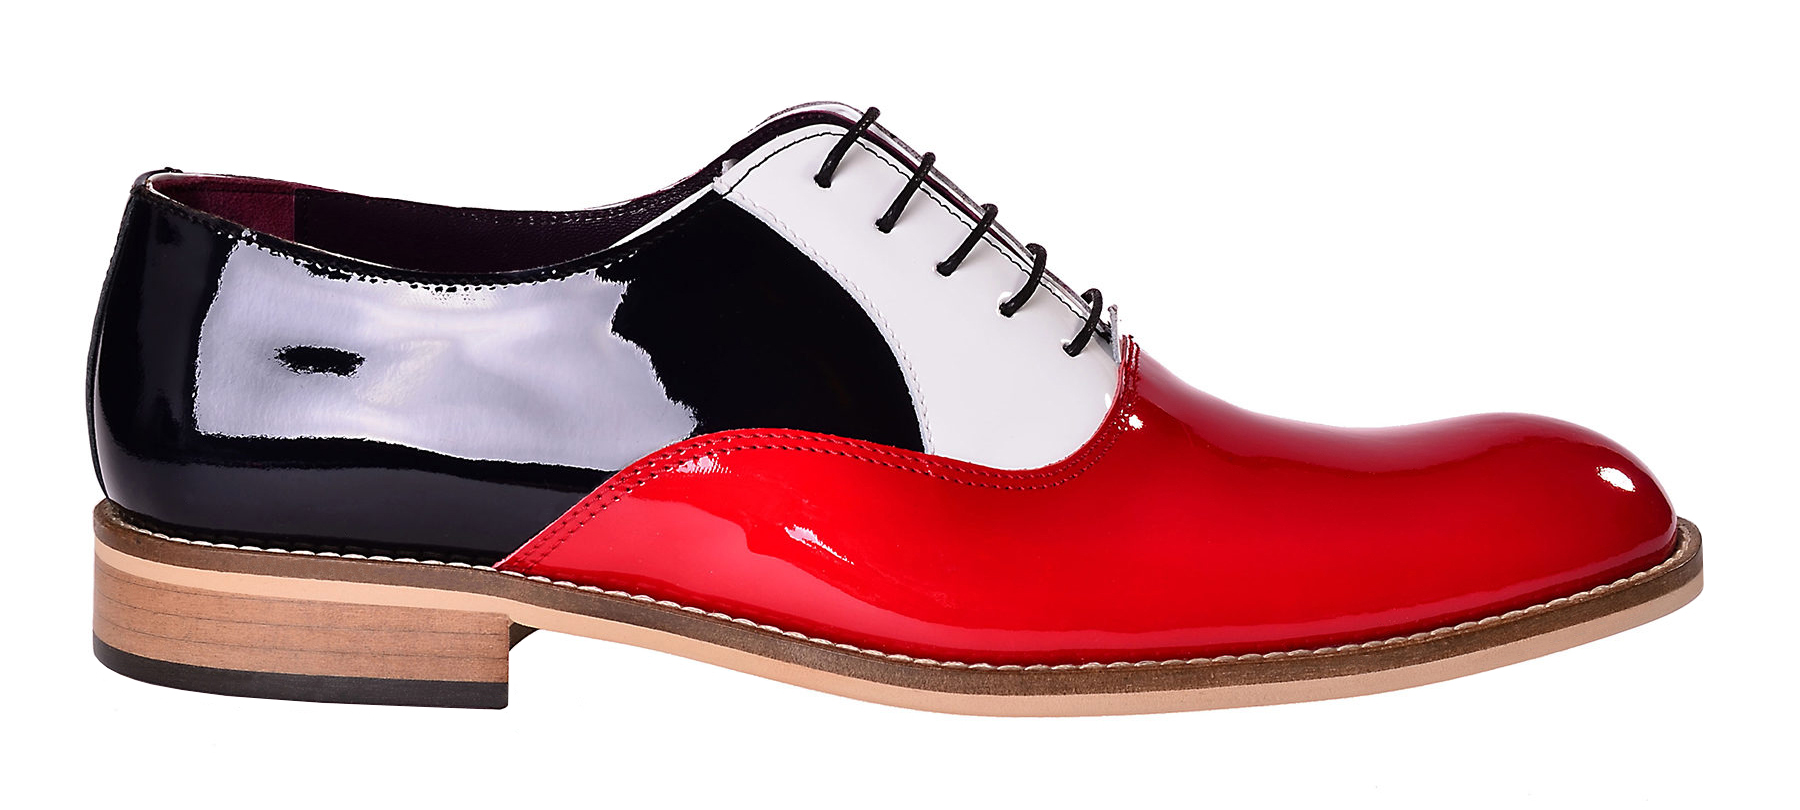 Handmade Oxford Patent Leather Shoes